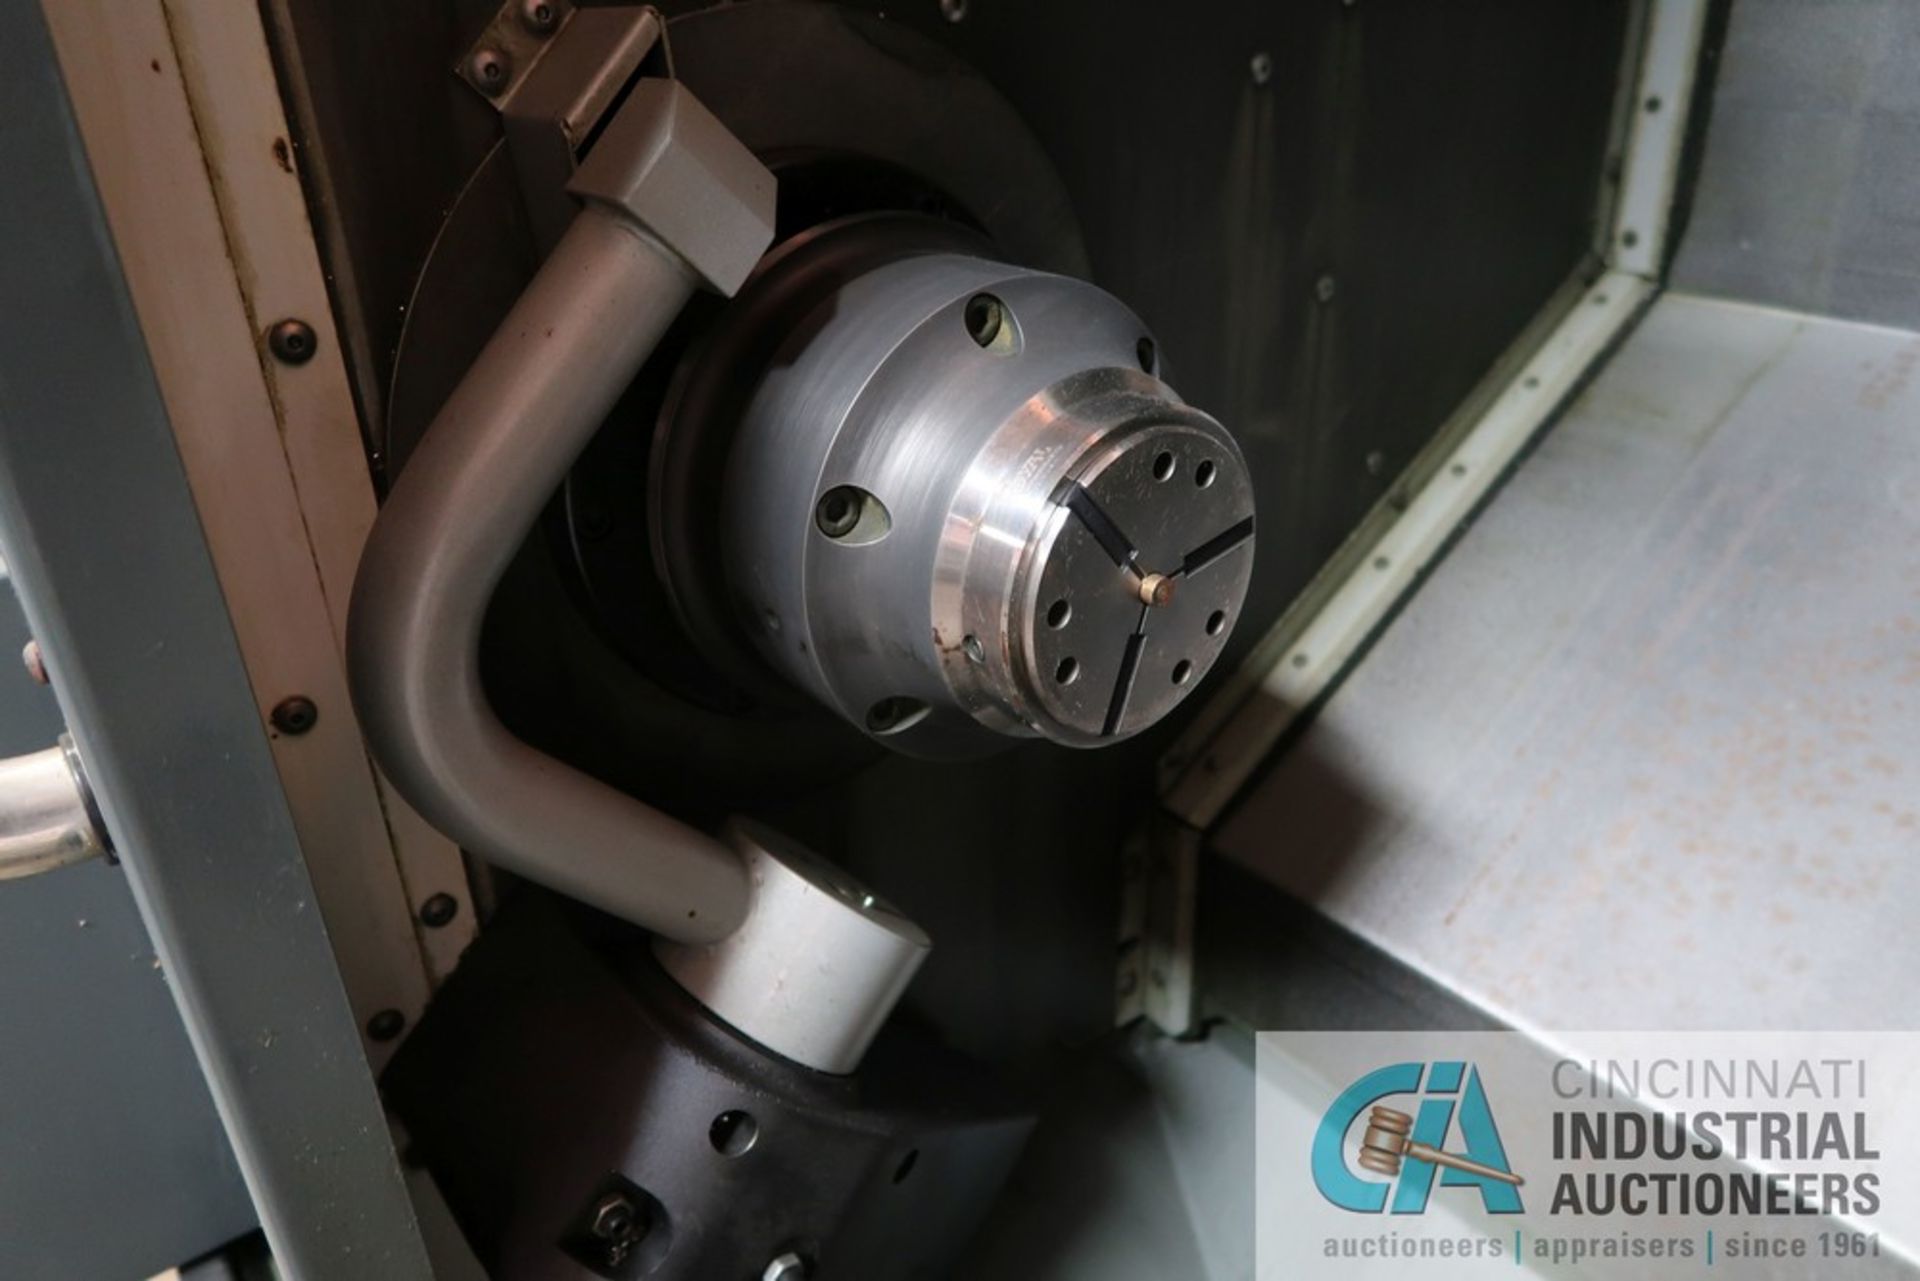 HAAS MODEL ST10 CNC TURNING CENTER; S/N 3108101, COLLET CHUCK, 12-POSITION TURRET, TOOL PRESETTER, - Image 4 of 10